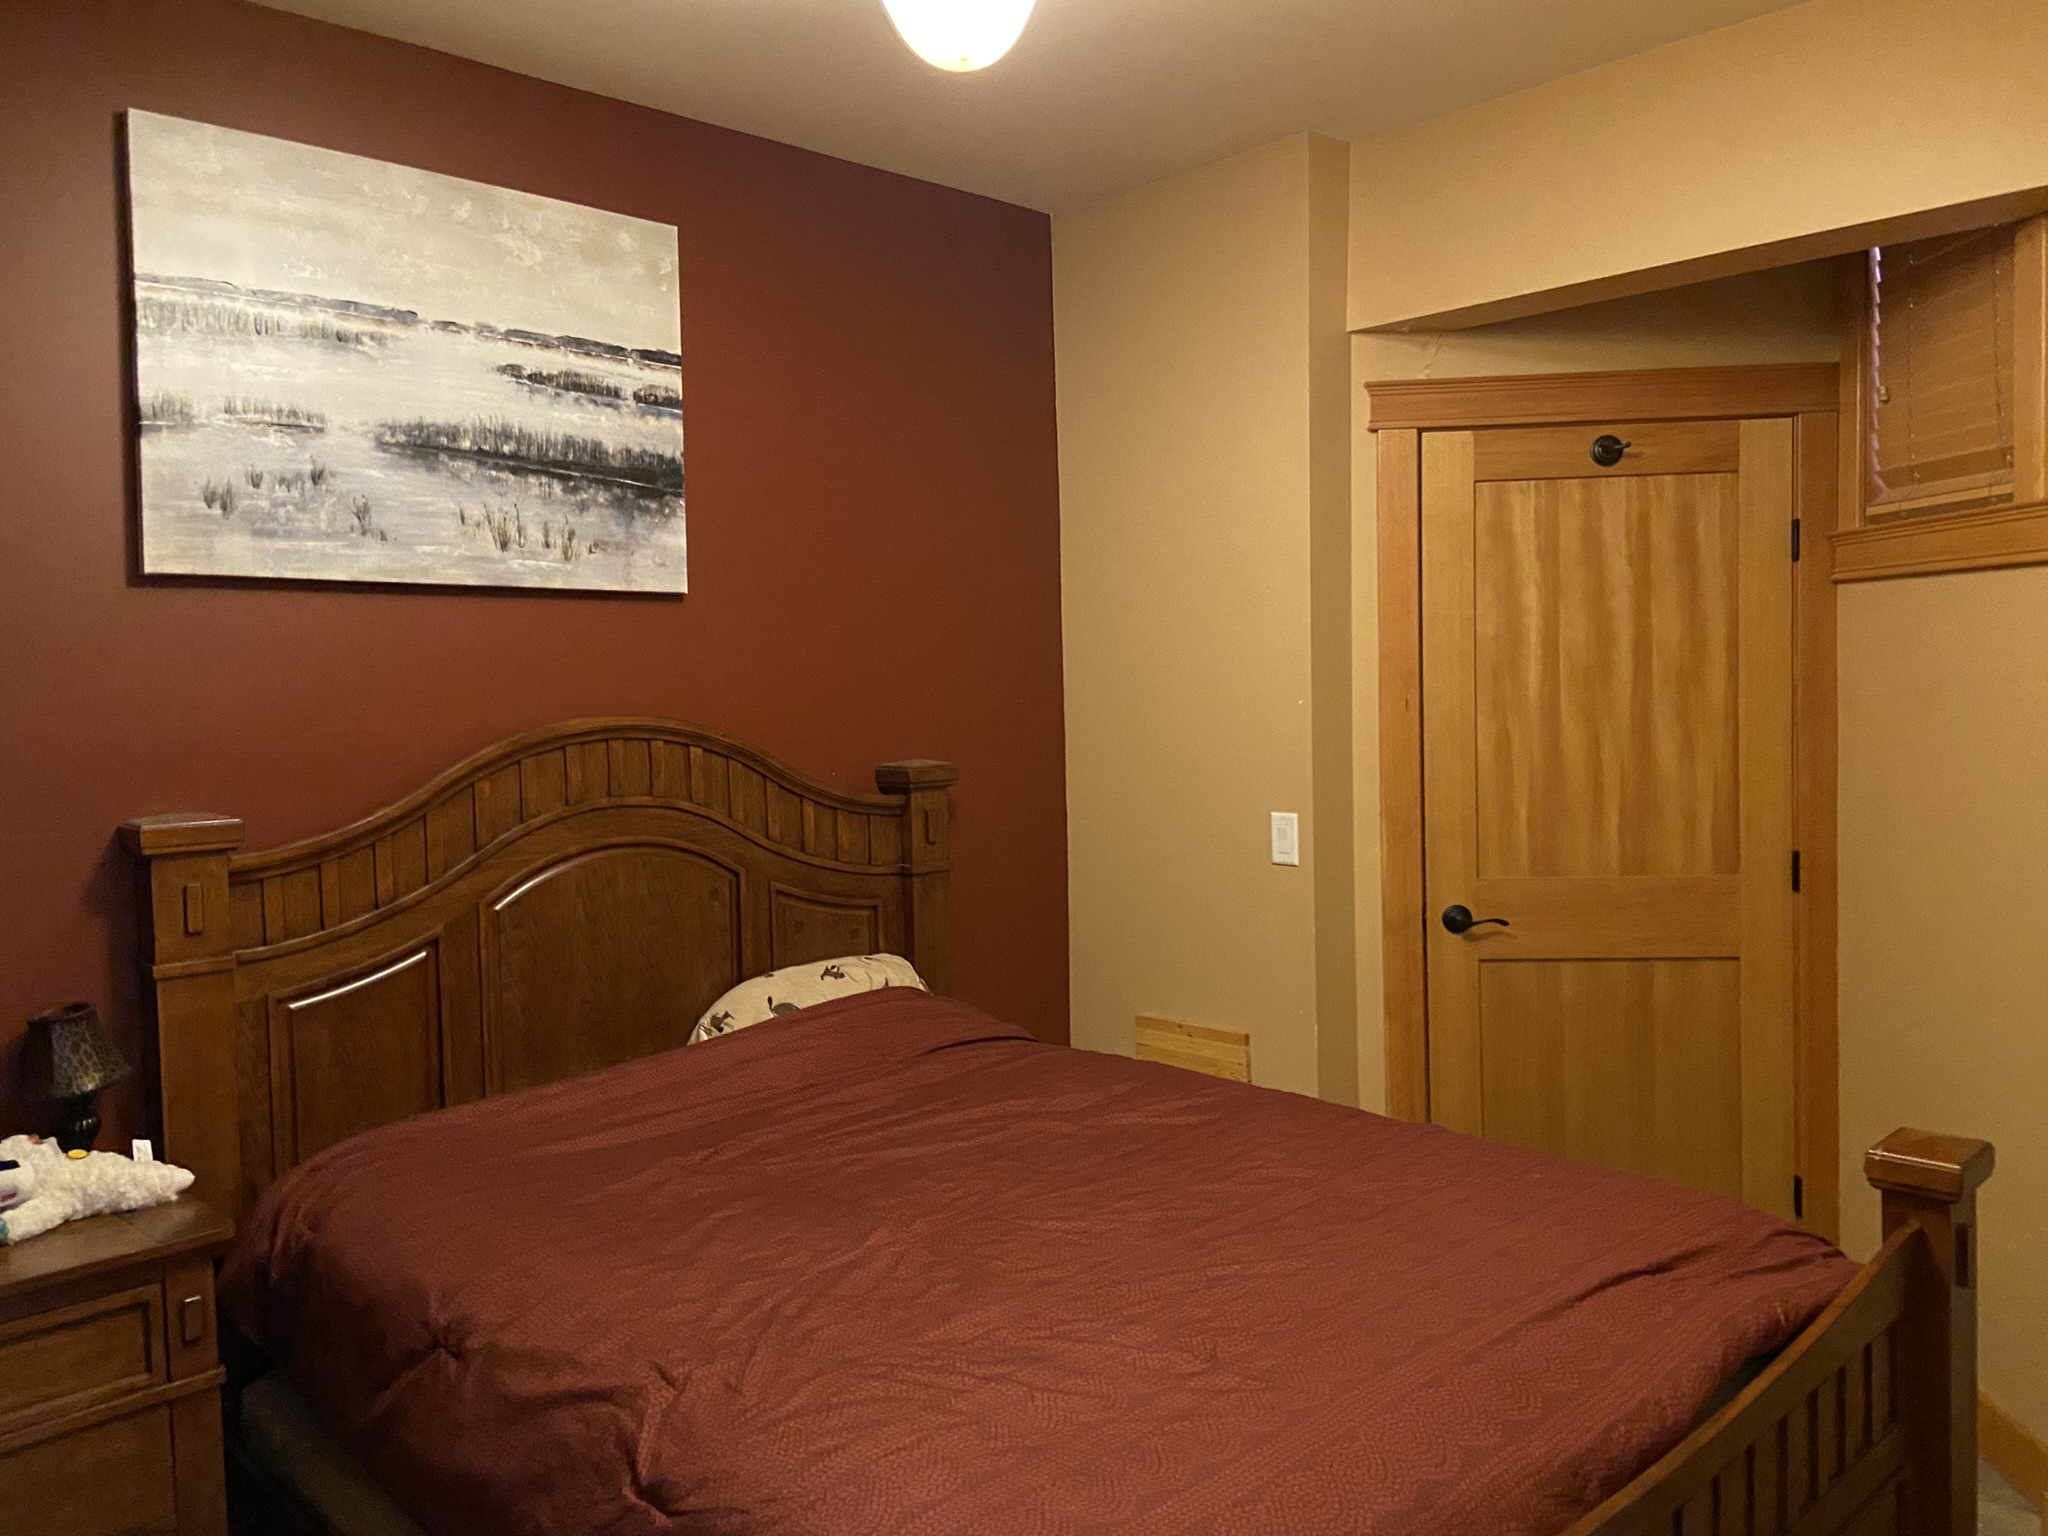 308 Creekview Road 21 Penticton/ Apex Mountain (Hedley) V2A 7N1